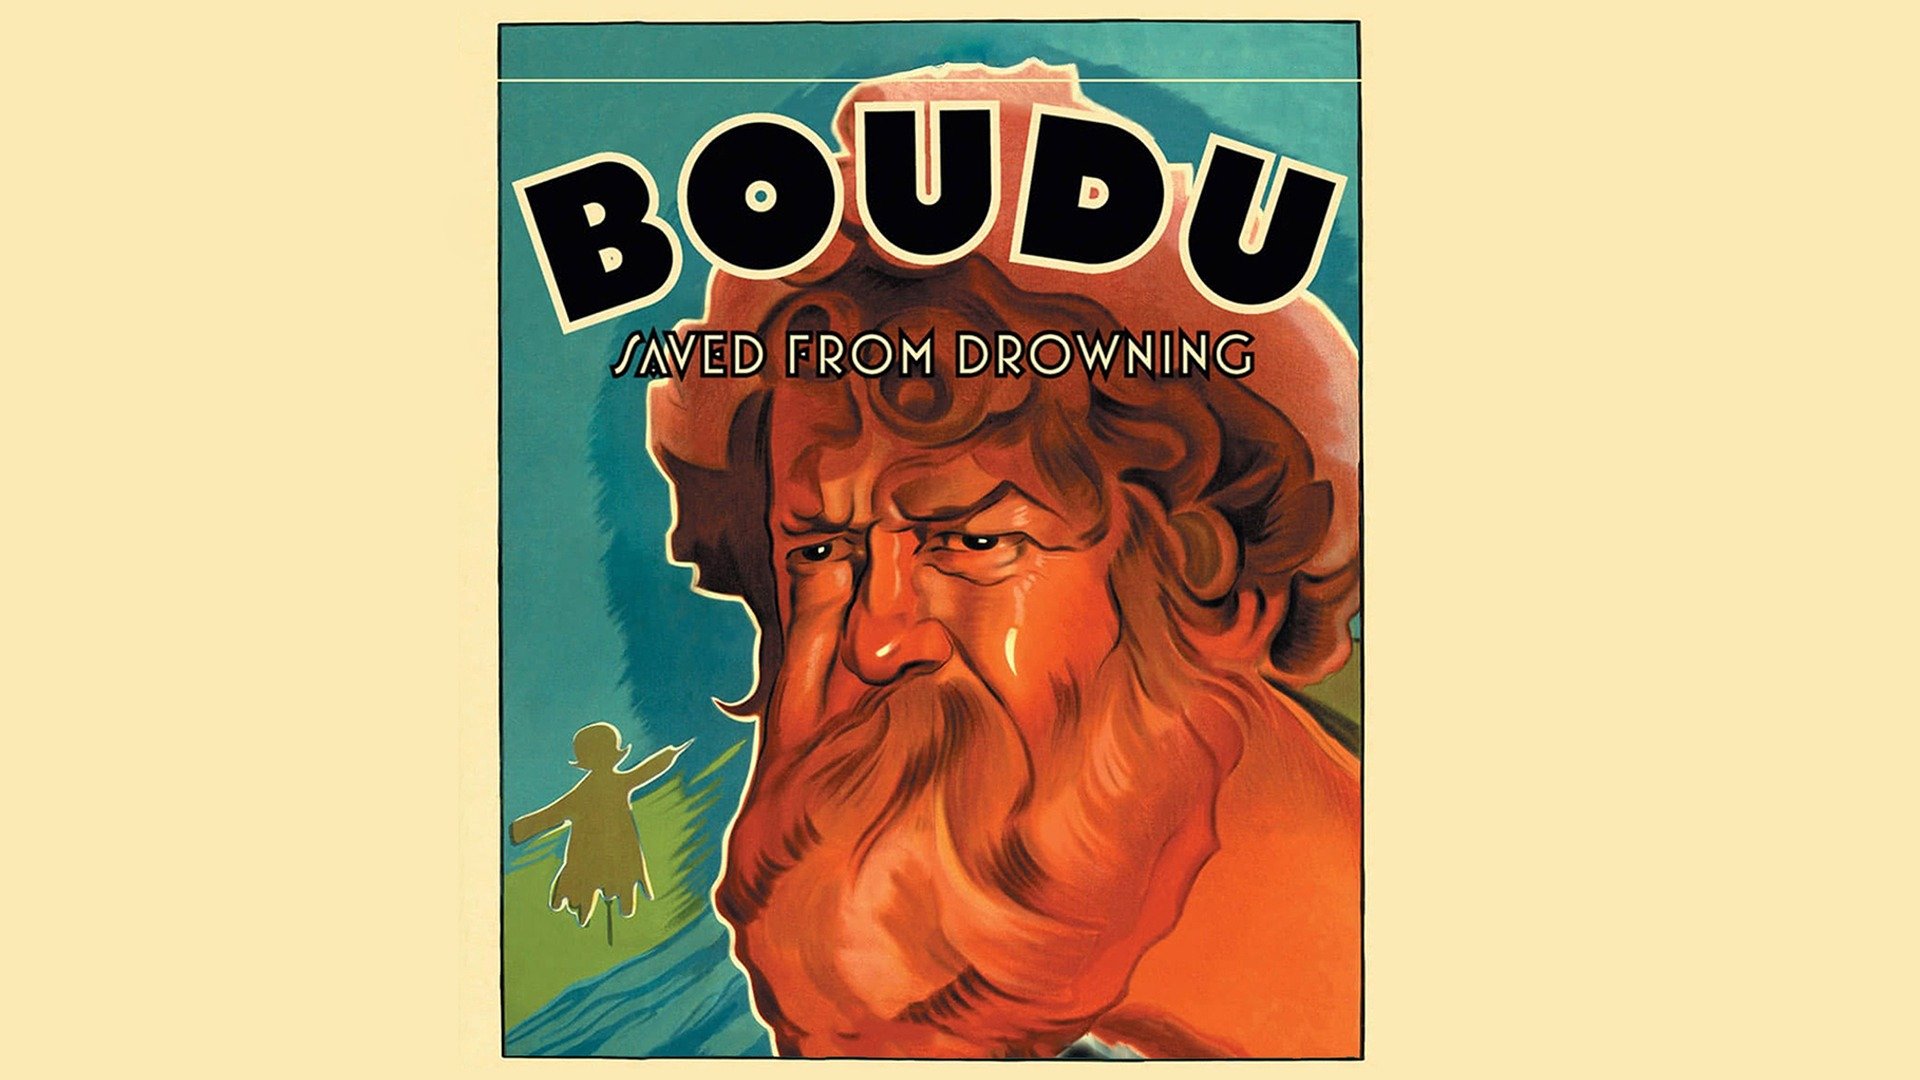 31-facts-about-the-movie-boudu-saved-from-drowning